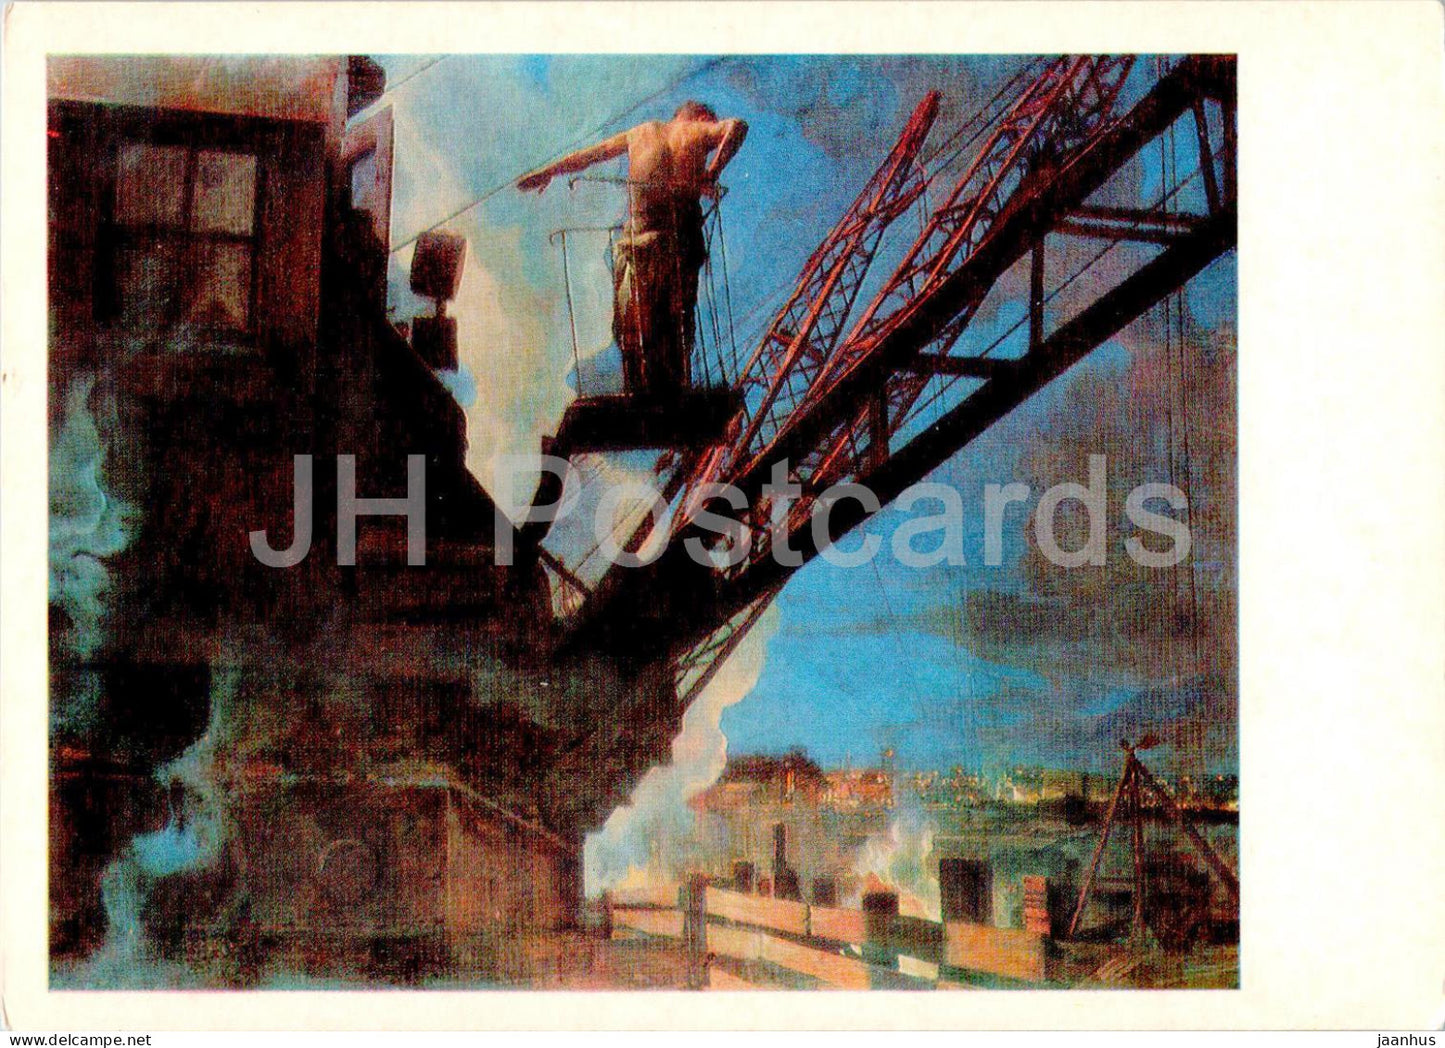 painting by Isaak Brodsky - Dneprostroy Worker - Russian art - 1983 - Russia USSR - unused